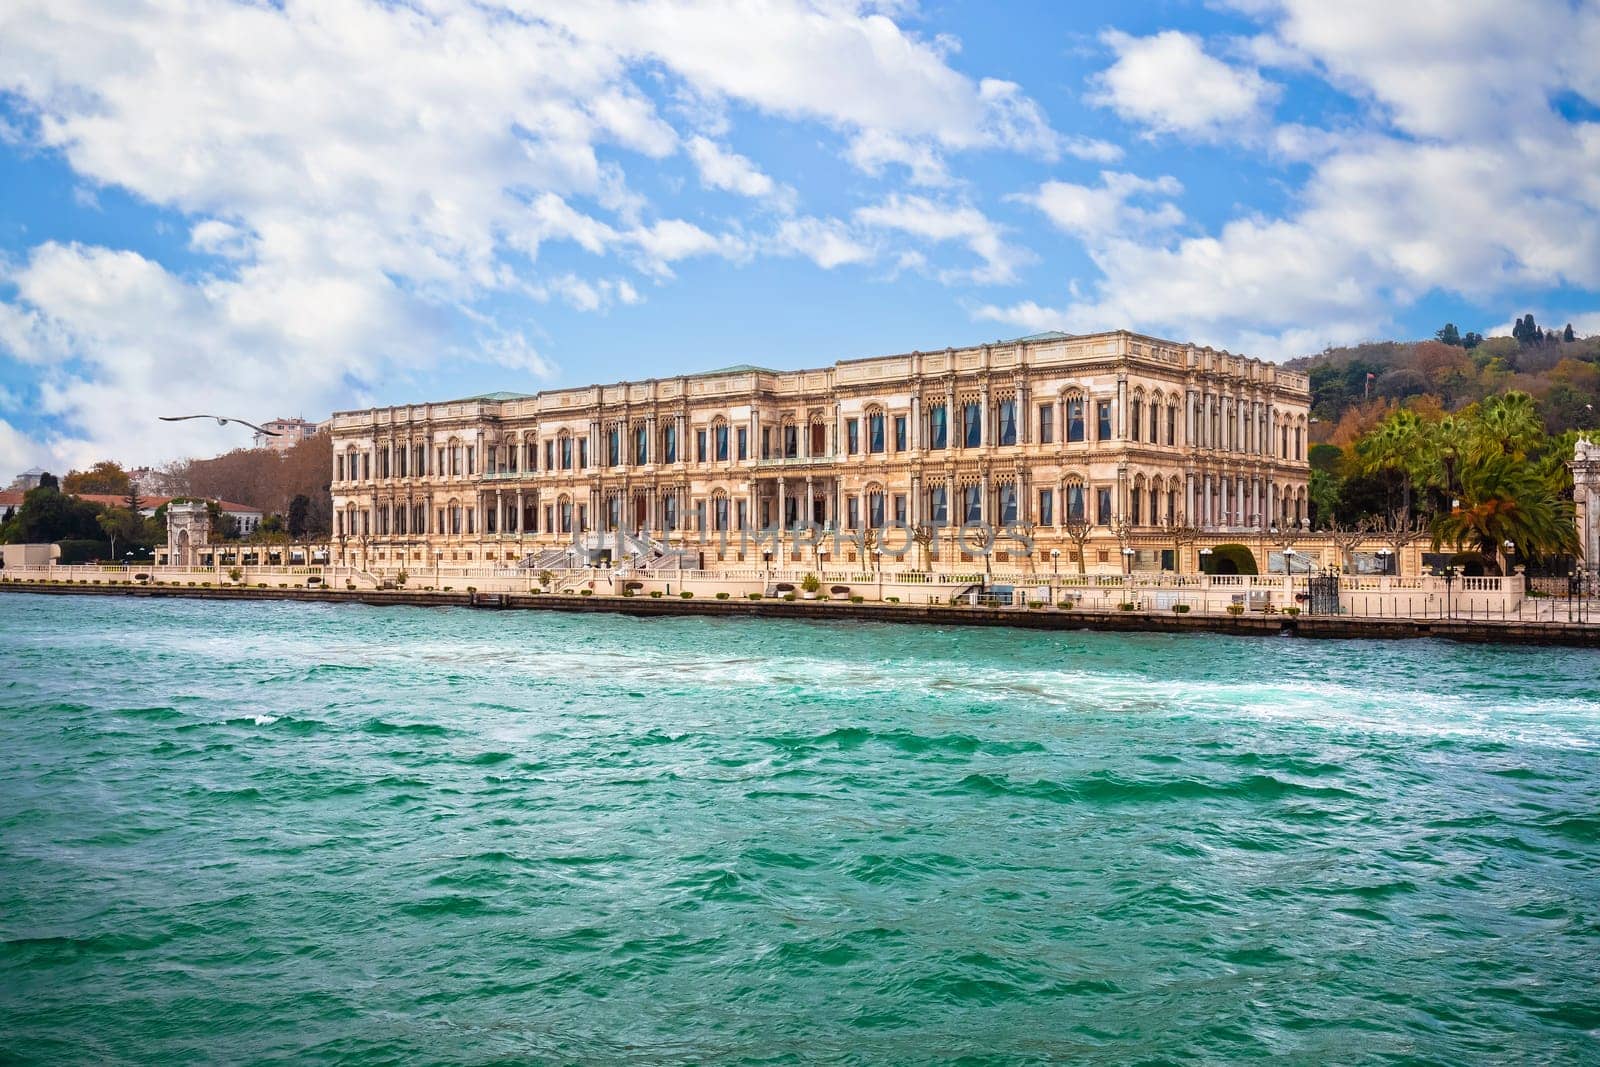 Cıragan Palace and Bosphorus waterfront of Istanbul view by xbrchx